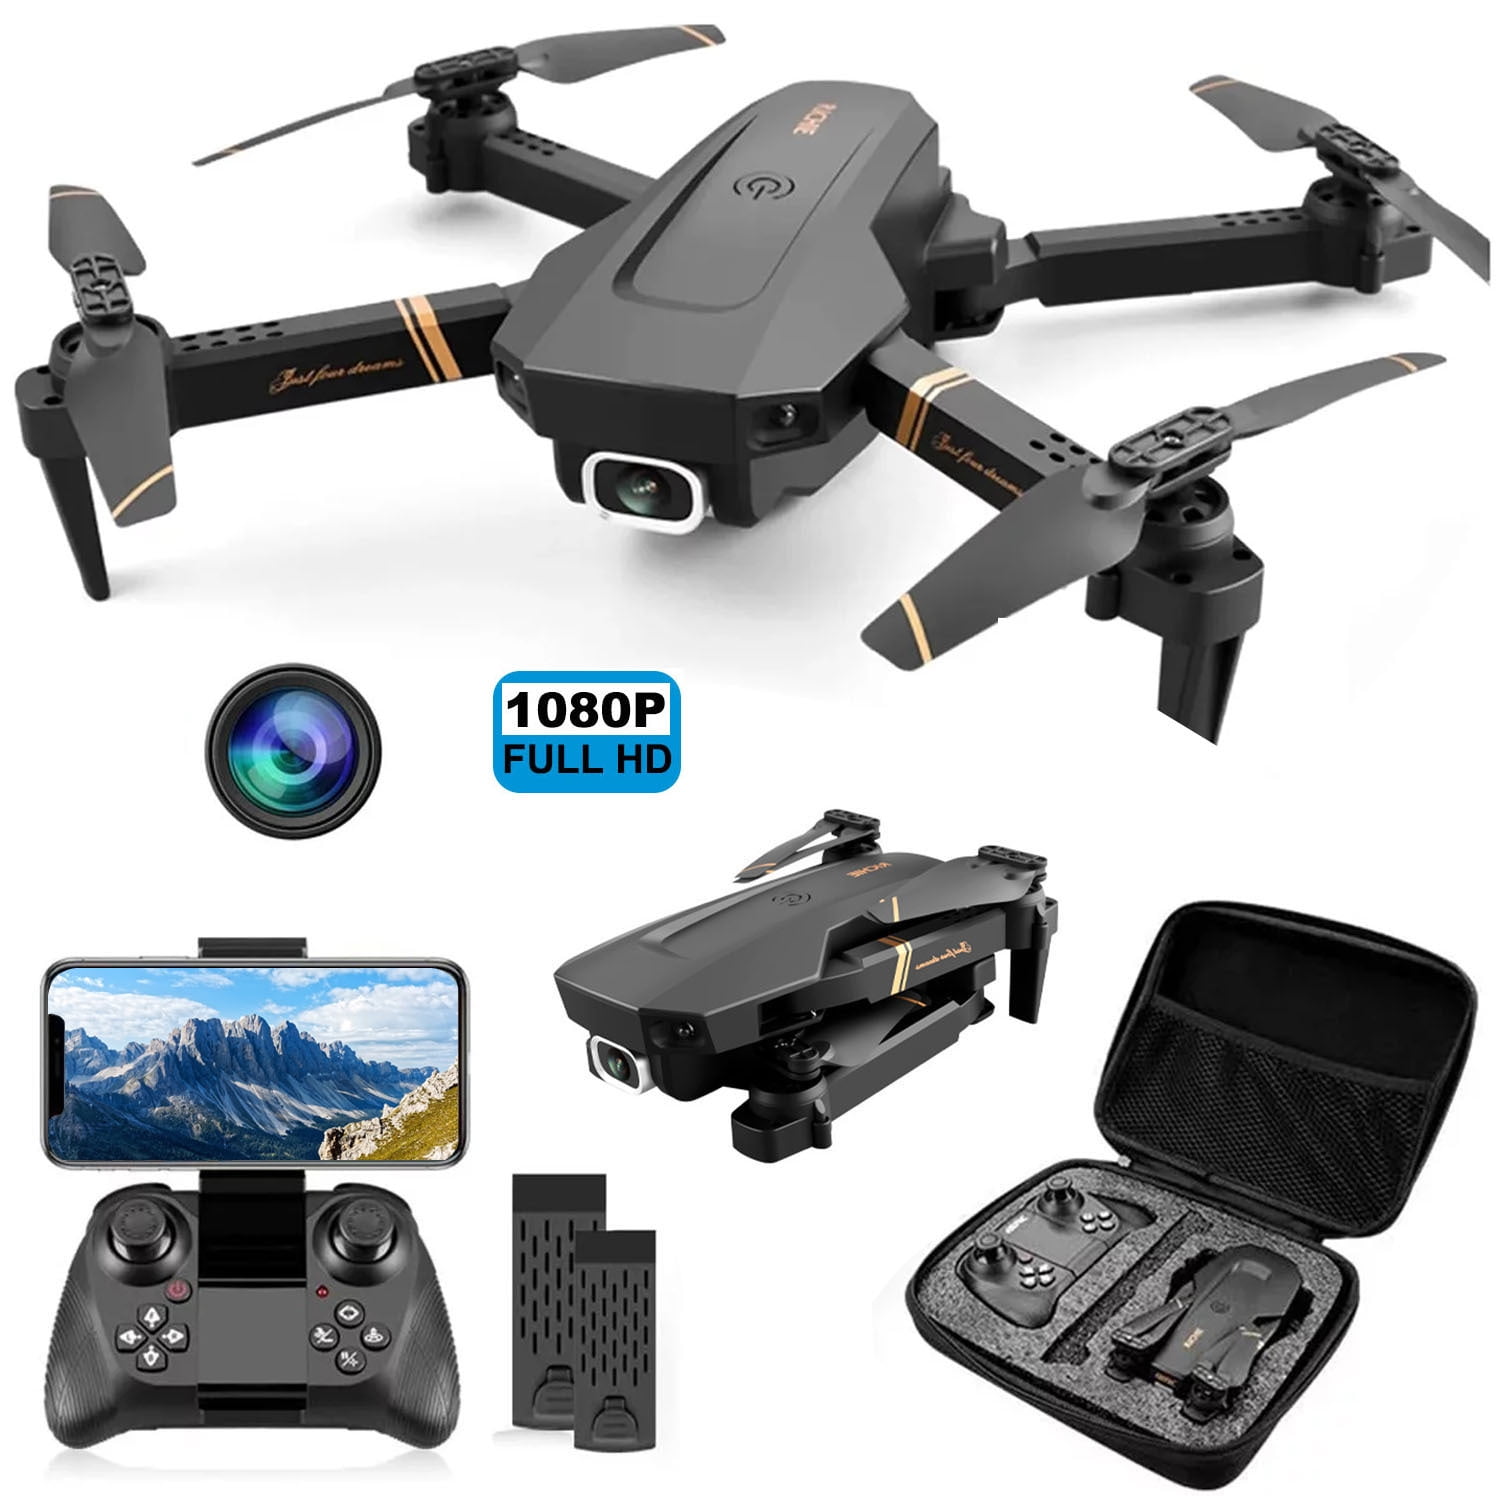 Zacro RC Drone with 1080P Camera for Adults and Kids, WiFi FPV Live Video RC Quadcopter for Beginners, 2 Batteries, Black